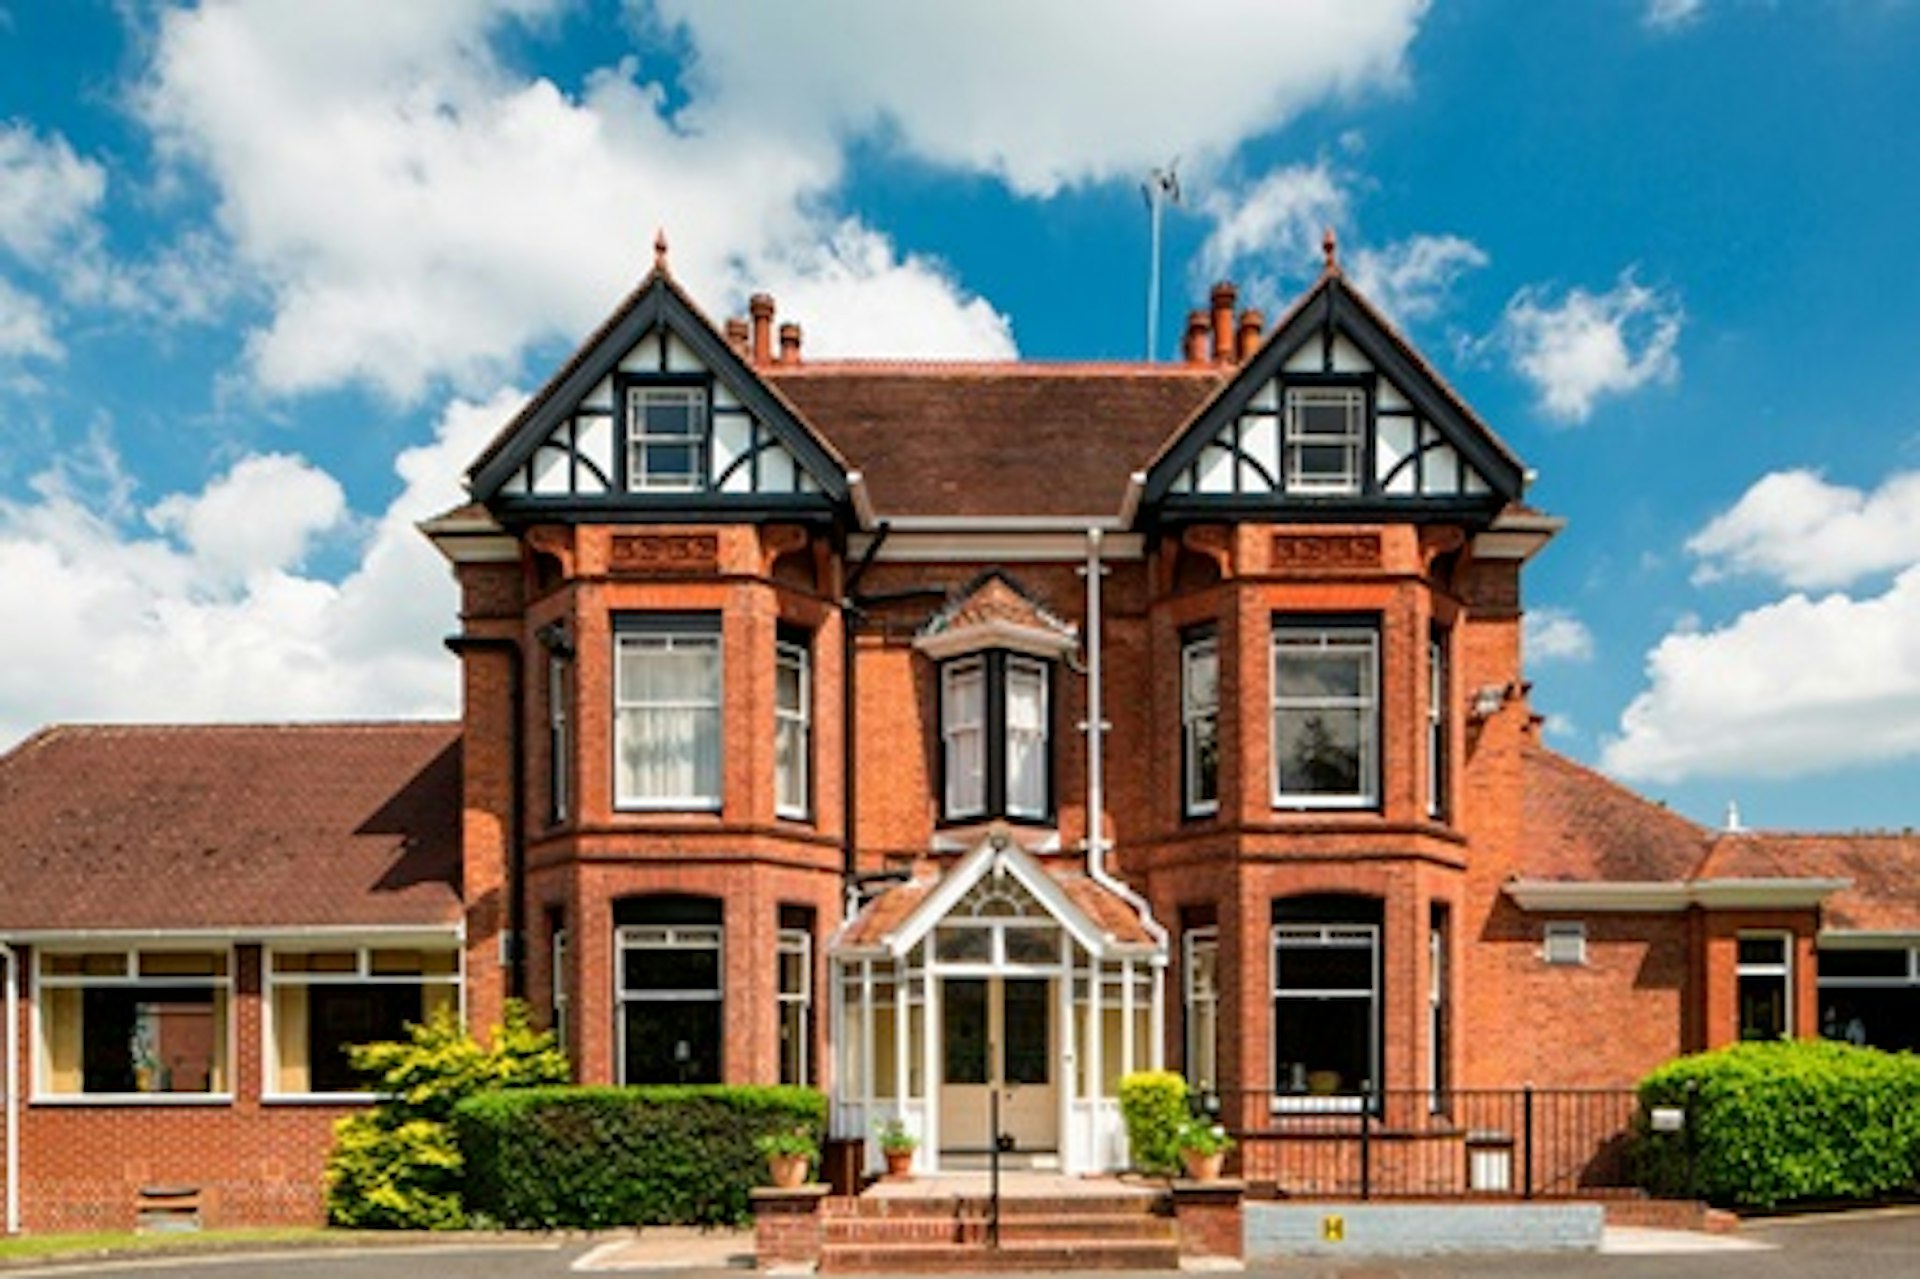 One Night Break for Two at the Mercure Kidderminster Hotel